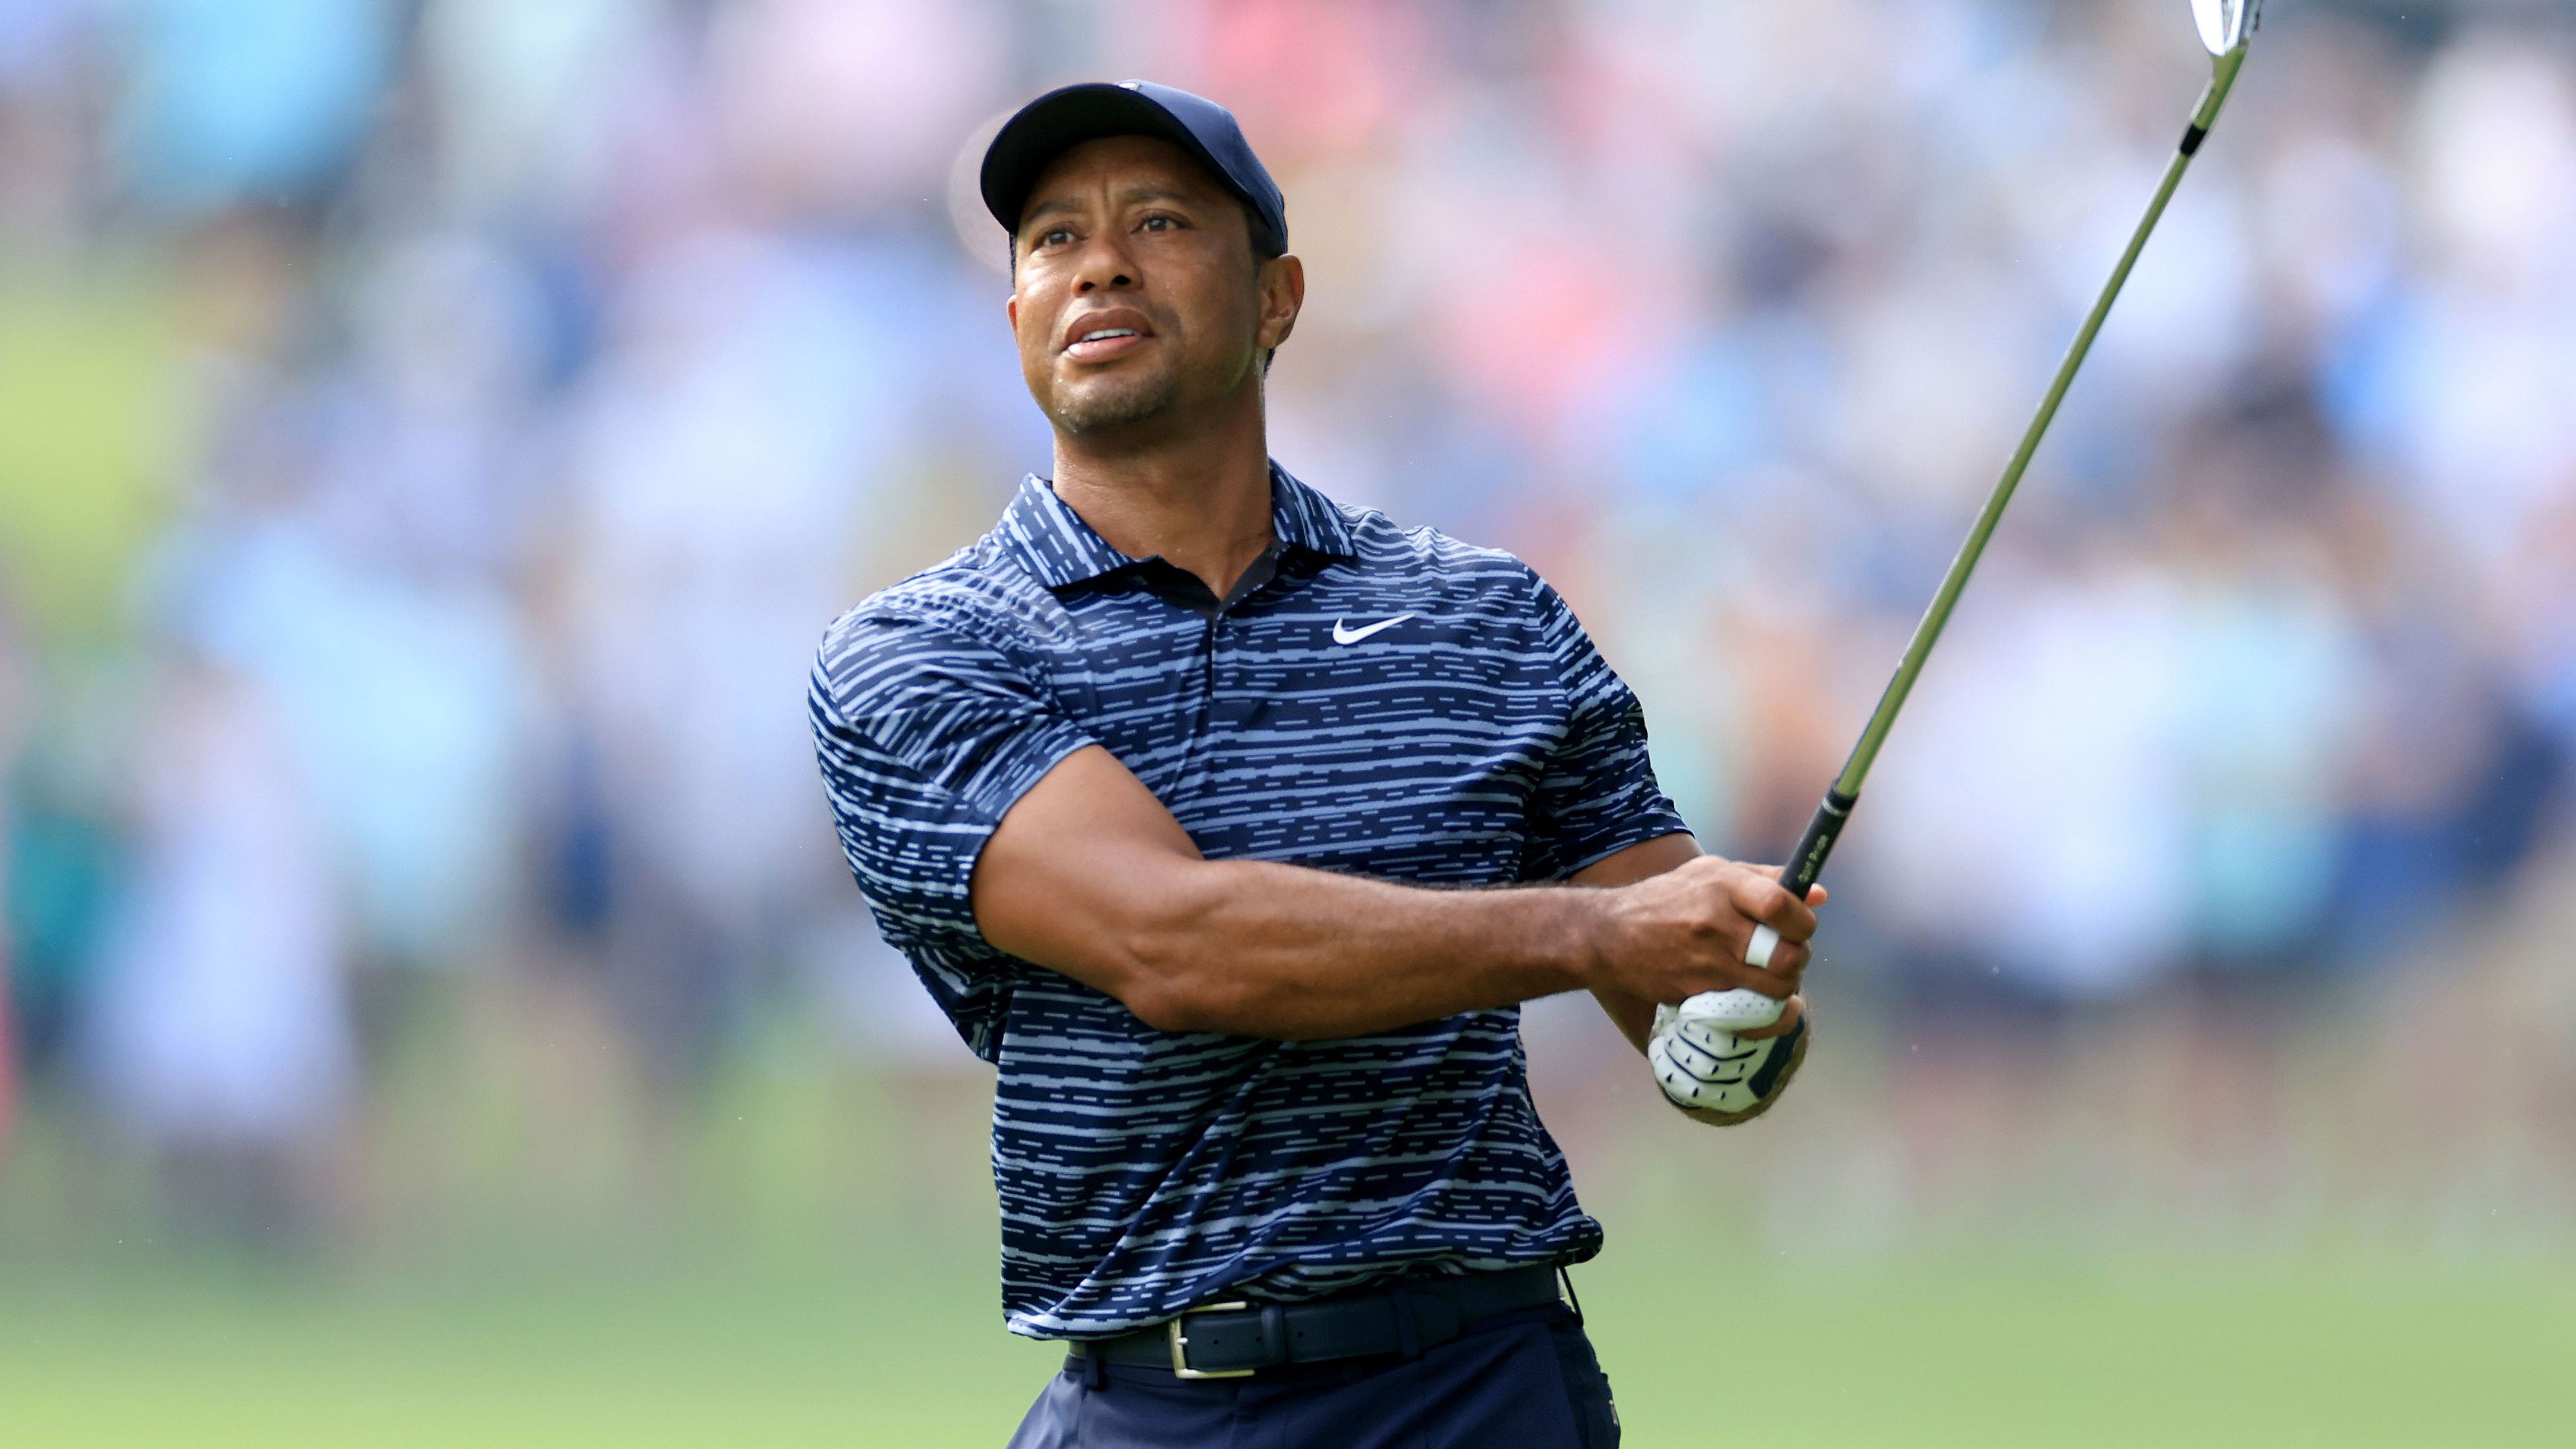 Tiger Woods says LIV golfers have 'turned their backs' on what made them